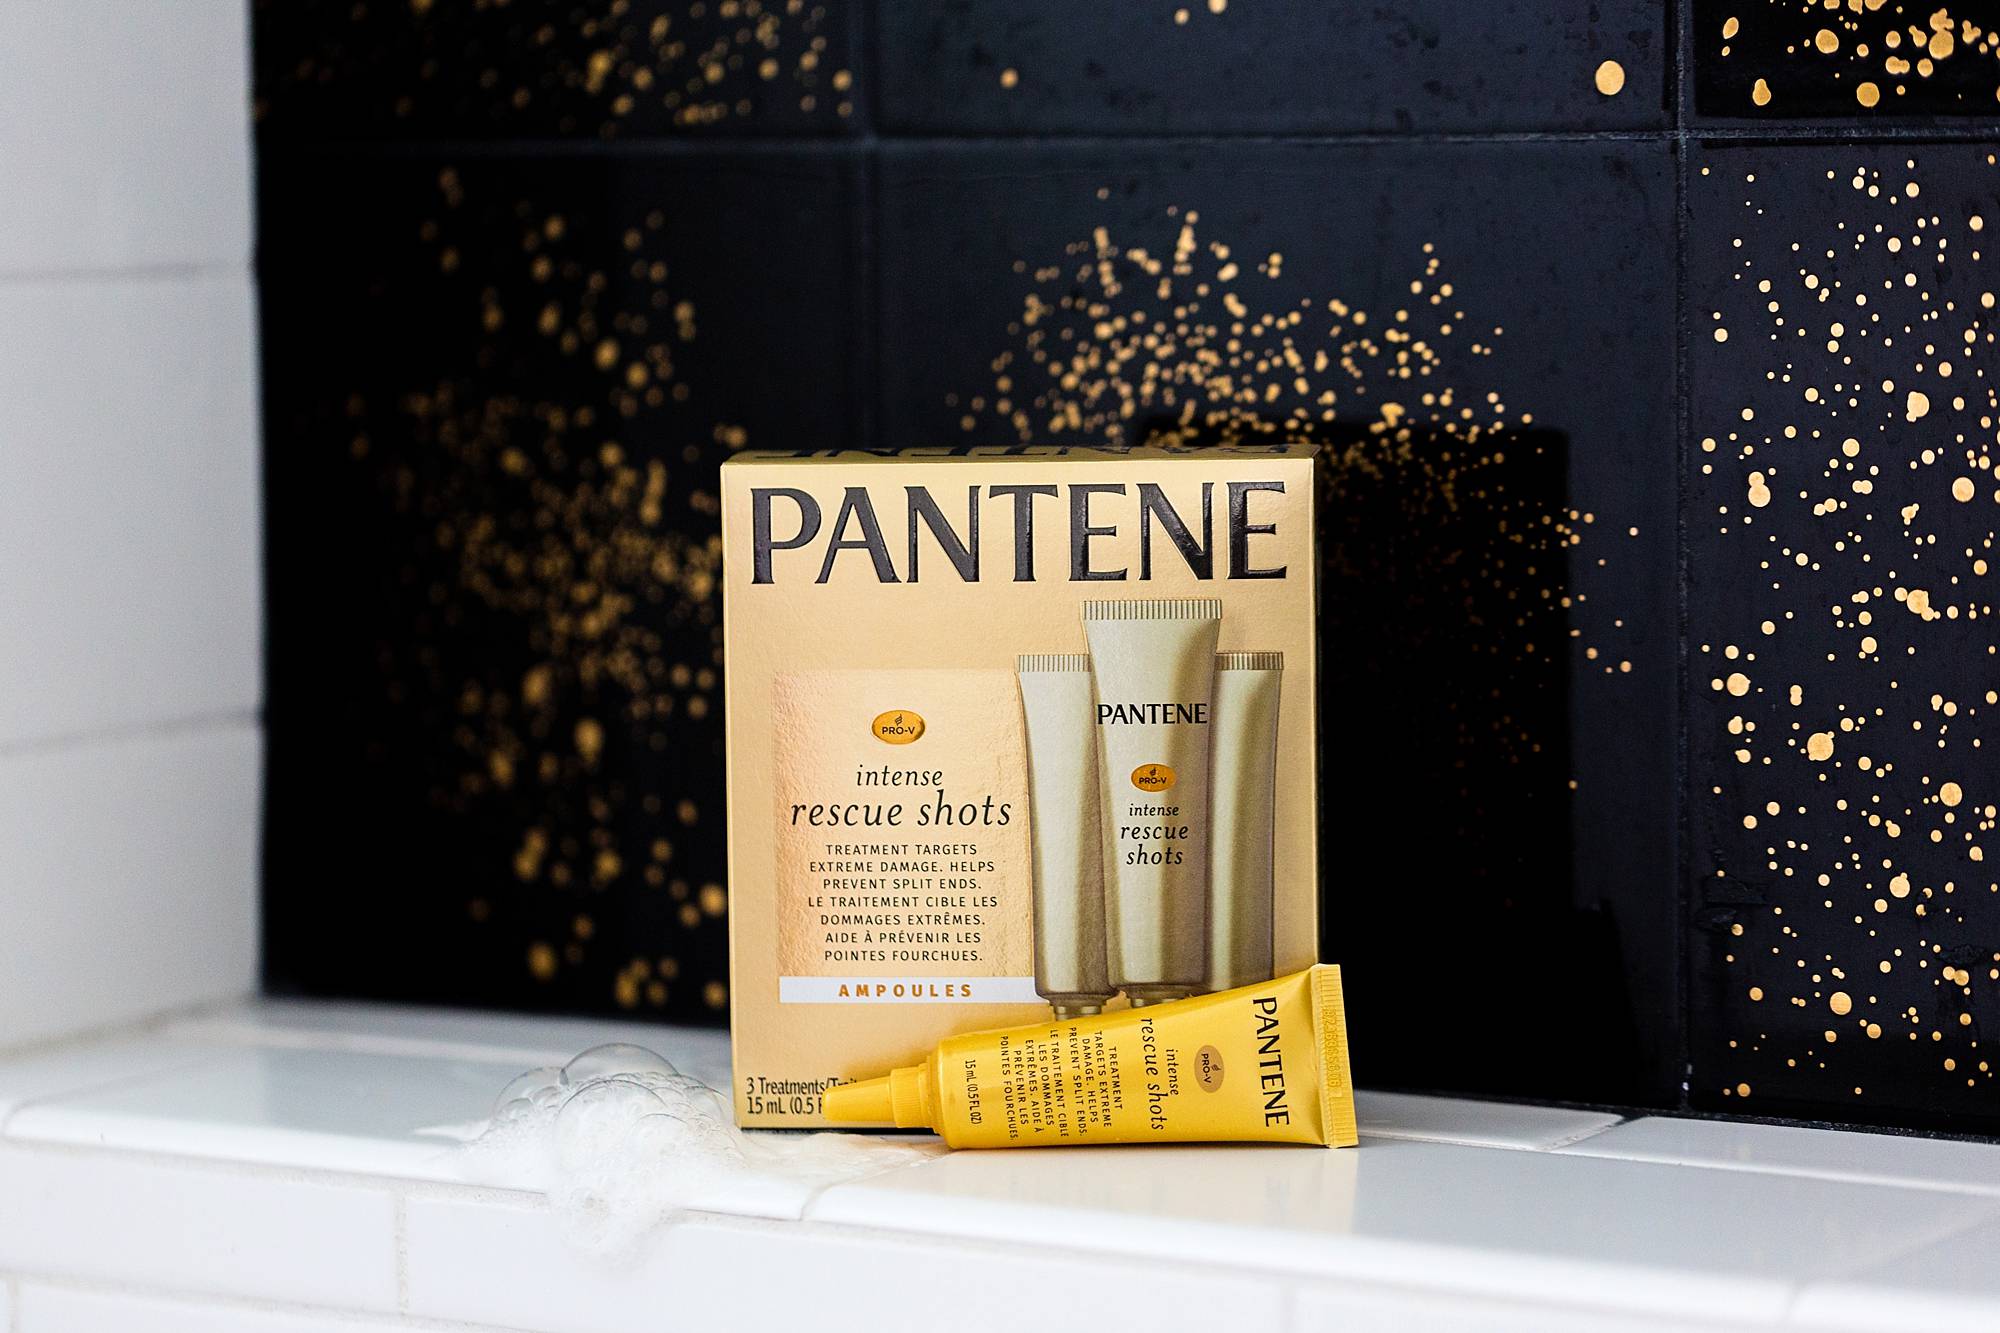 Pantene has new Intense Rescue Shots for great hair only takes 30 seconds! 